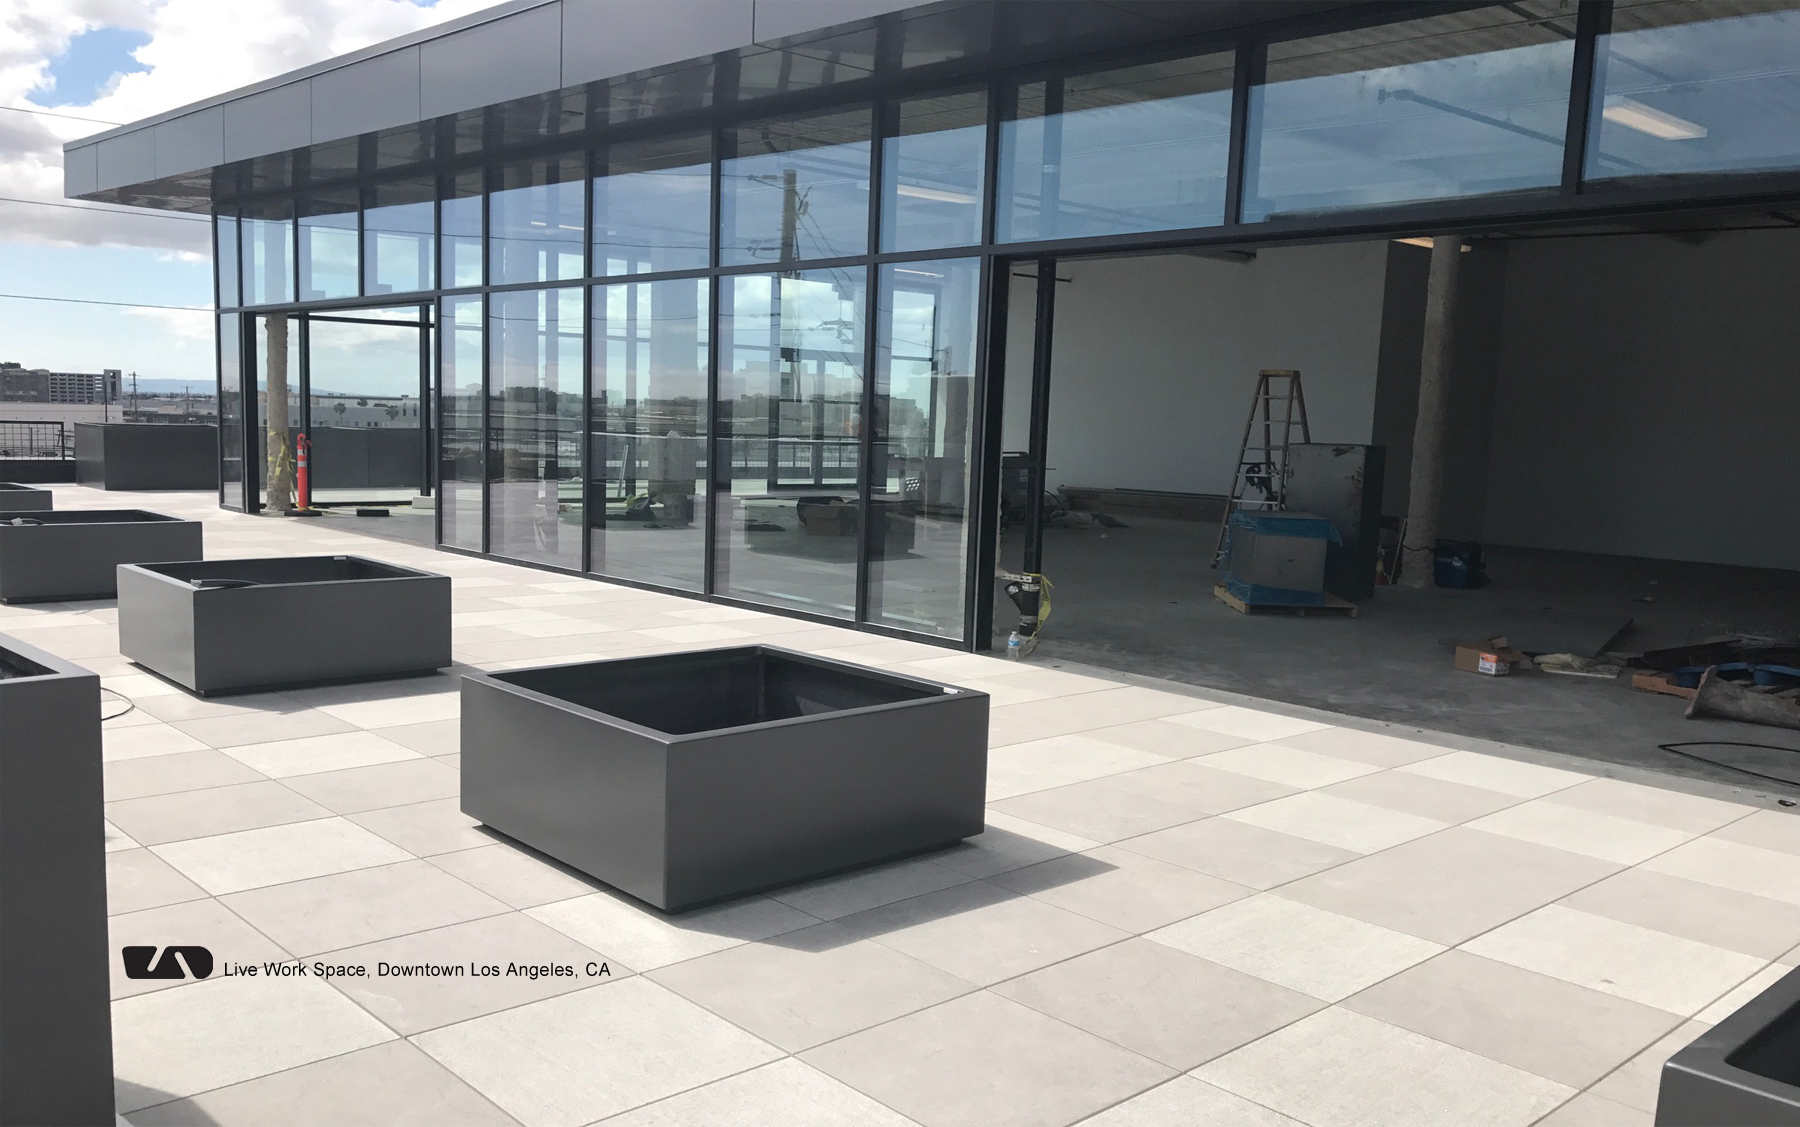 <h1 class="text-white">Porcelain Pavers on pedestals are the leading solution for commercial walk decks</h1>